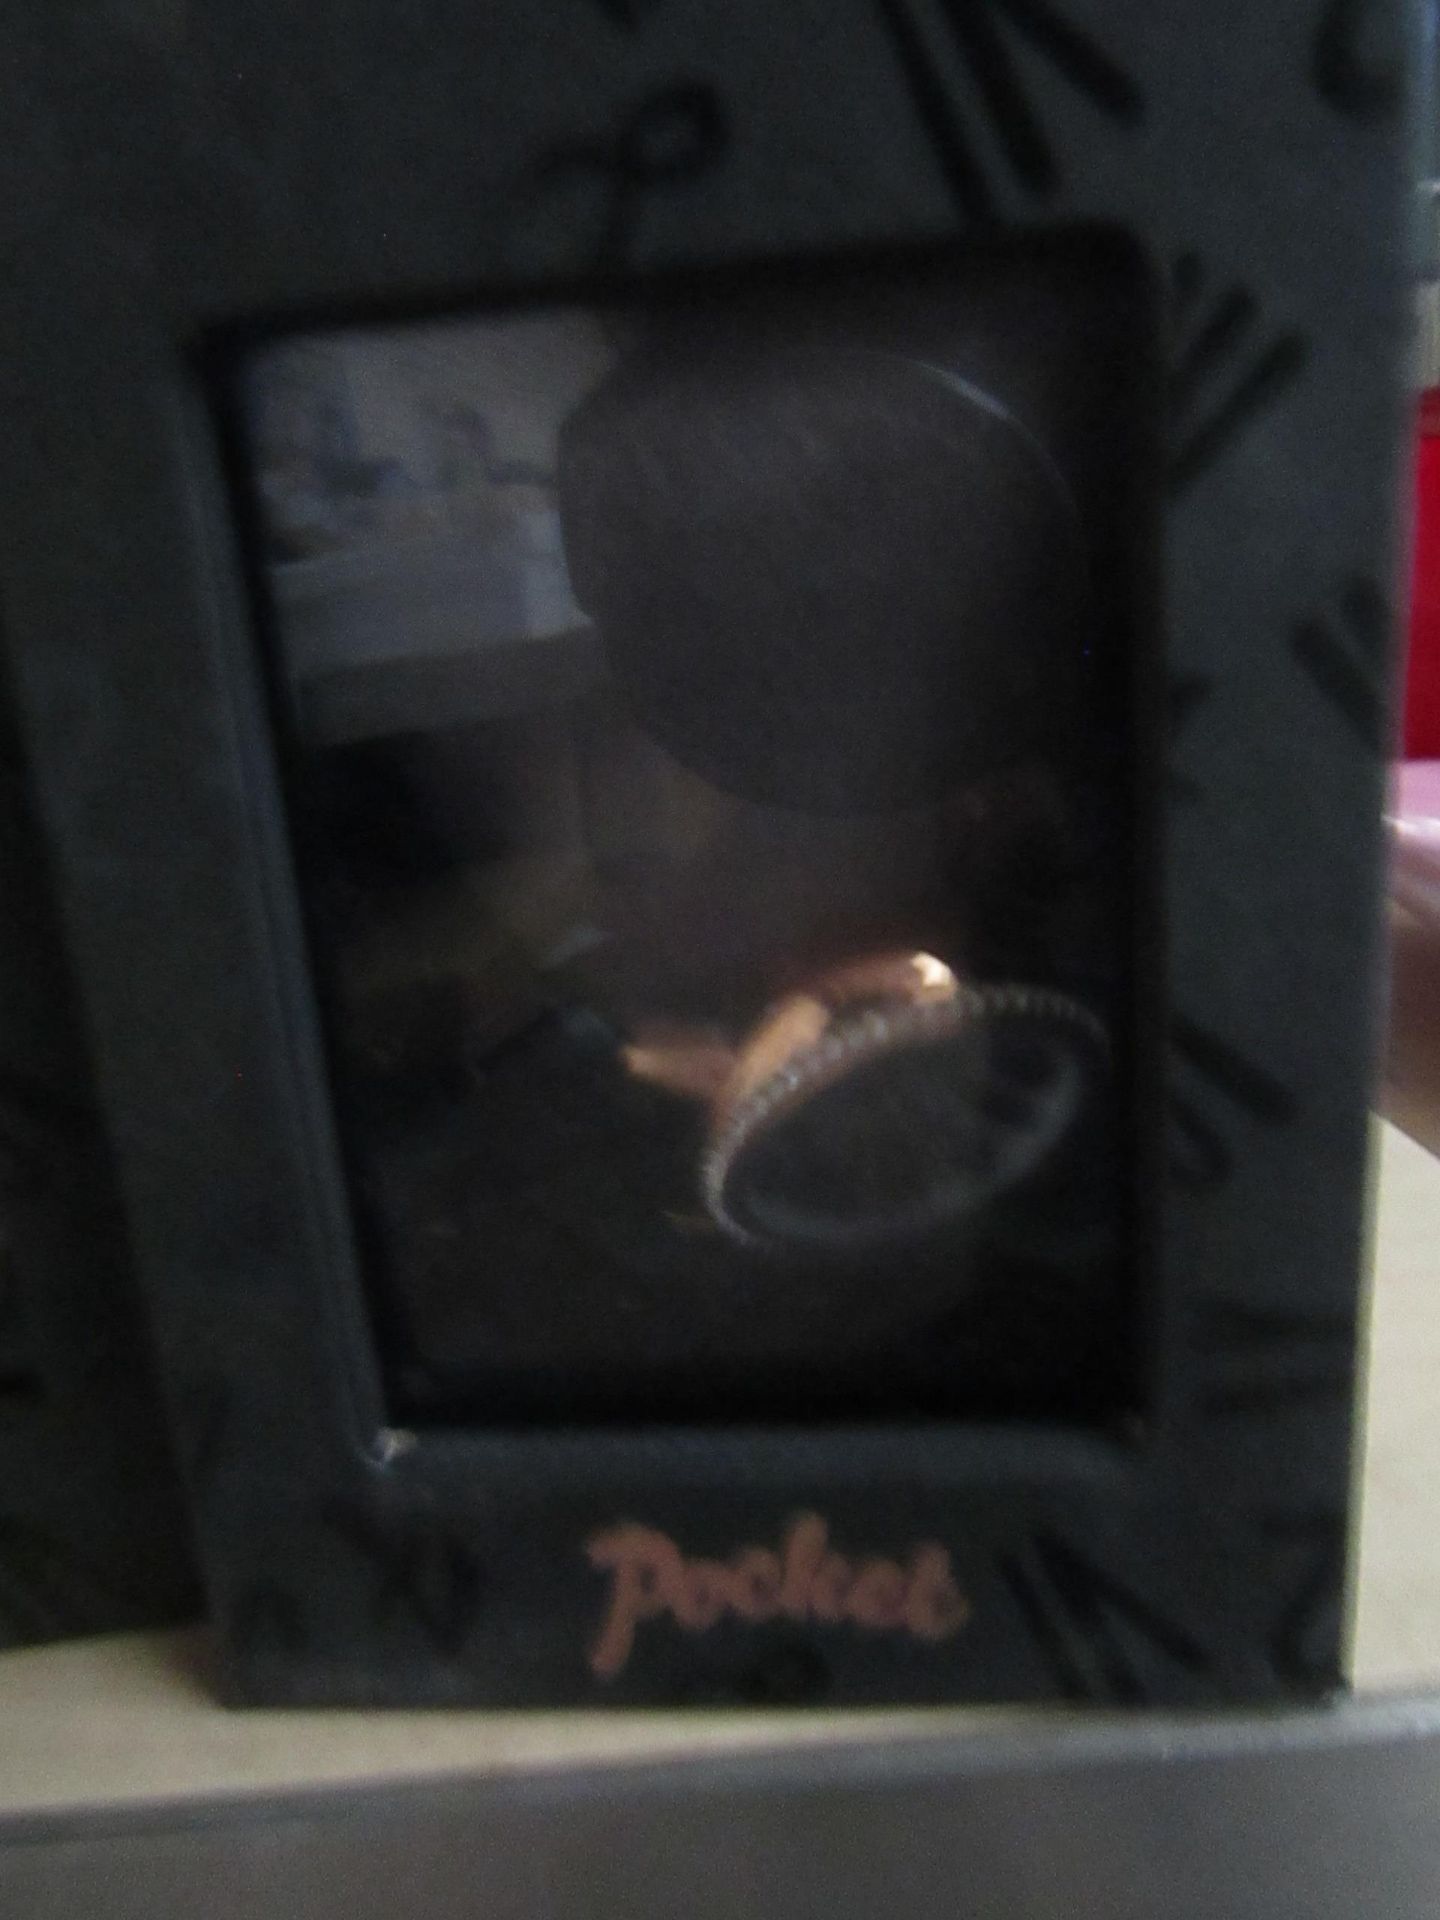 Pocket Branded Wrist Watch. Boxed see image for design - Image 2 of 2